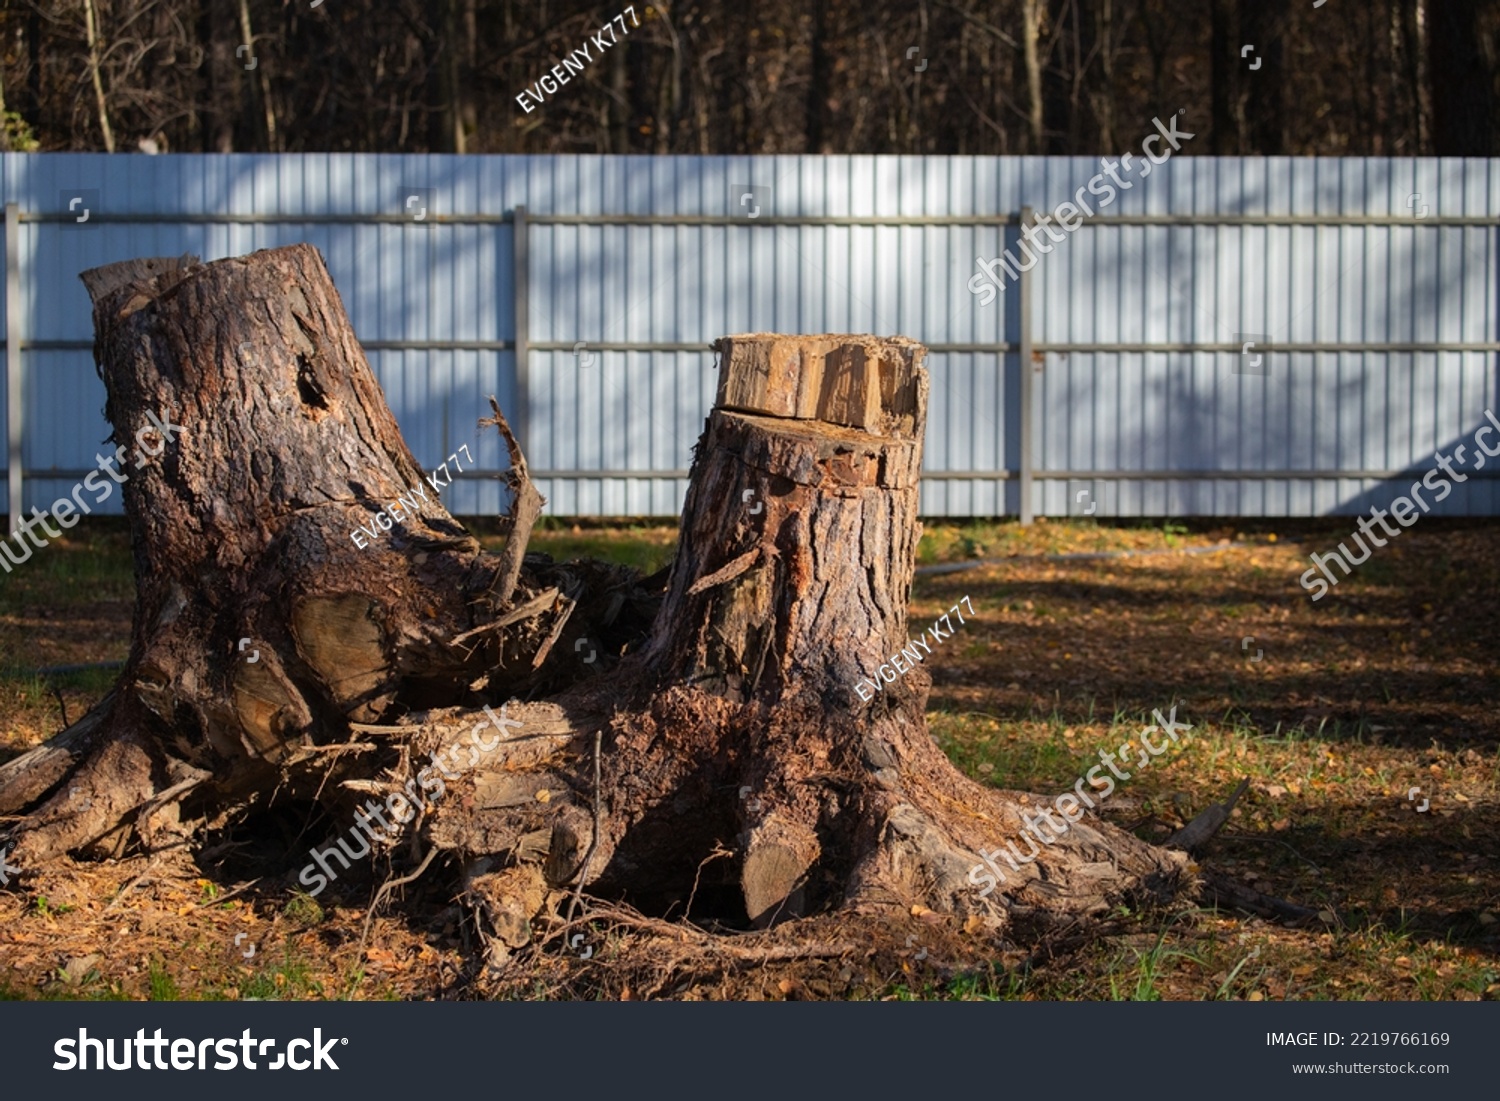 Uprooting of pine stumps in the garden. A stump with its roots torn out of the ground. Deleting a tree. #2219766169